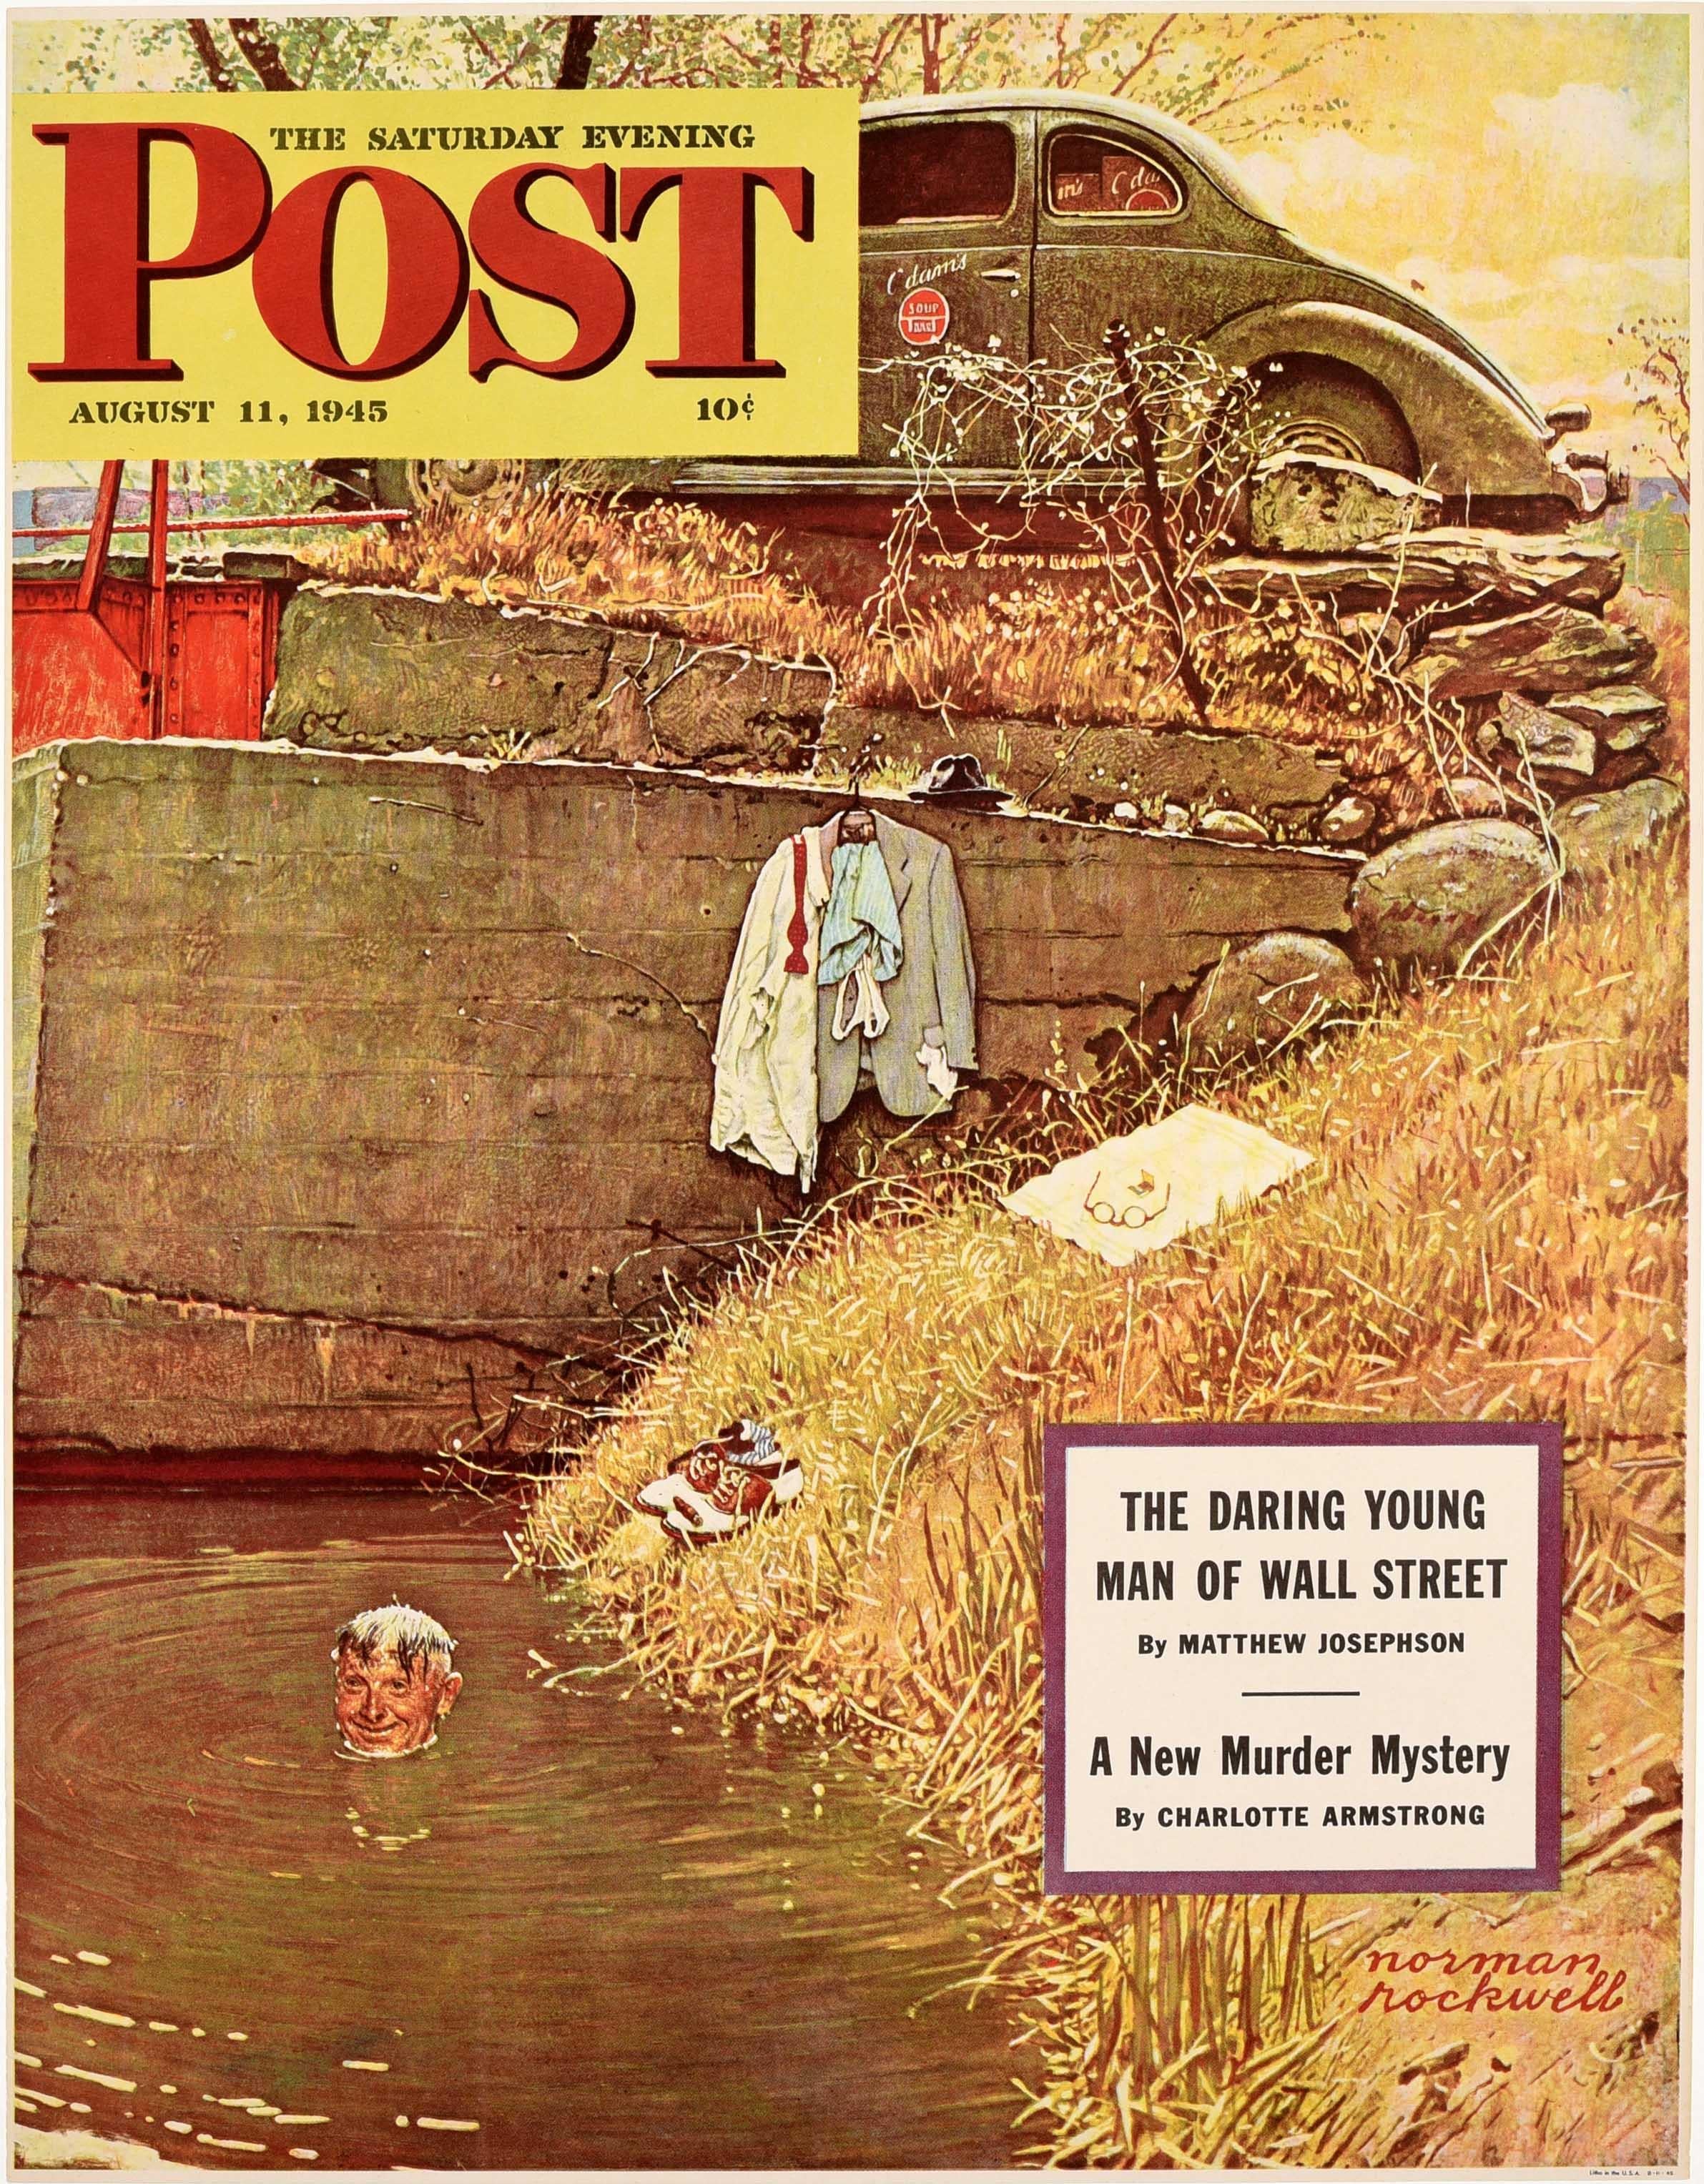 Original vintage magazine advertising poster for The Saturday Evening Post 11 August 1945 featuring an image of a car parked by a bridge with the smiling driver swimming in the river below, his clothes and hat on the old stone wall with glasses on a